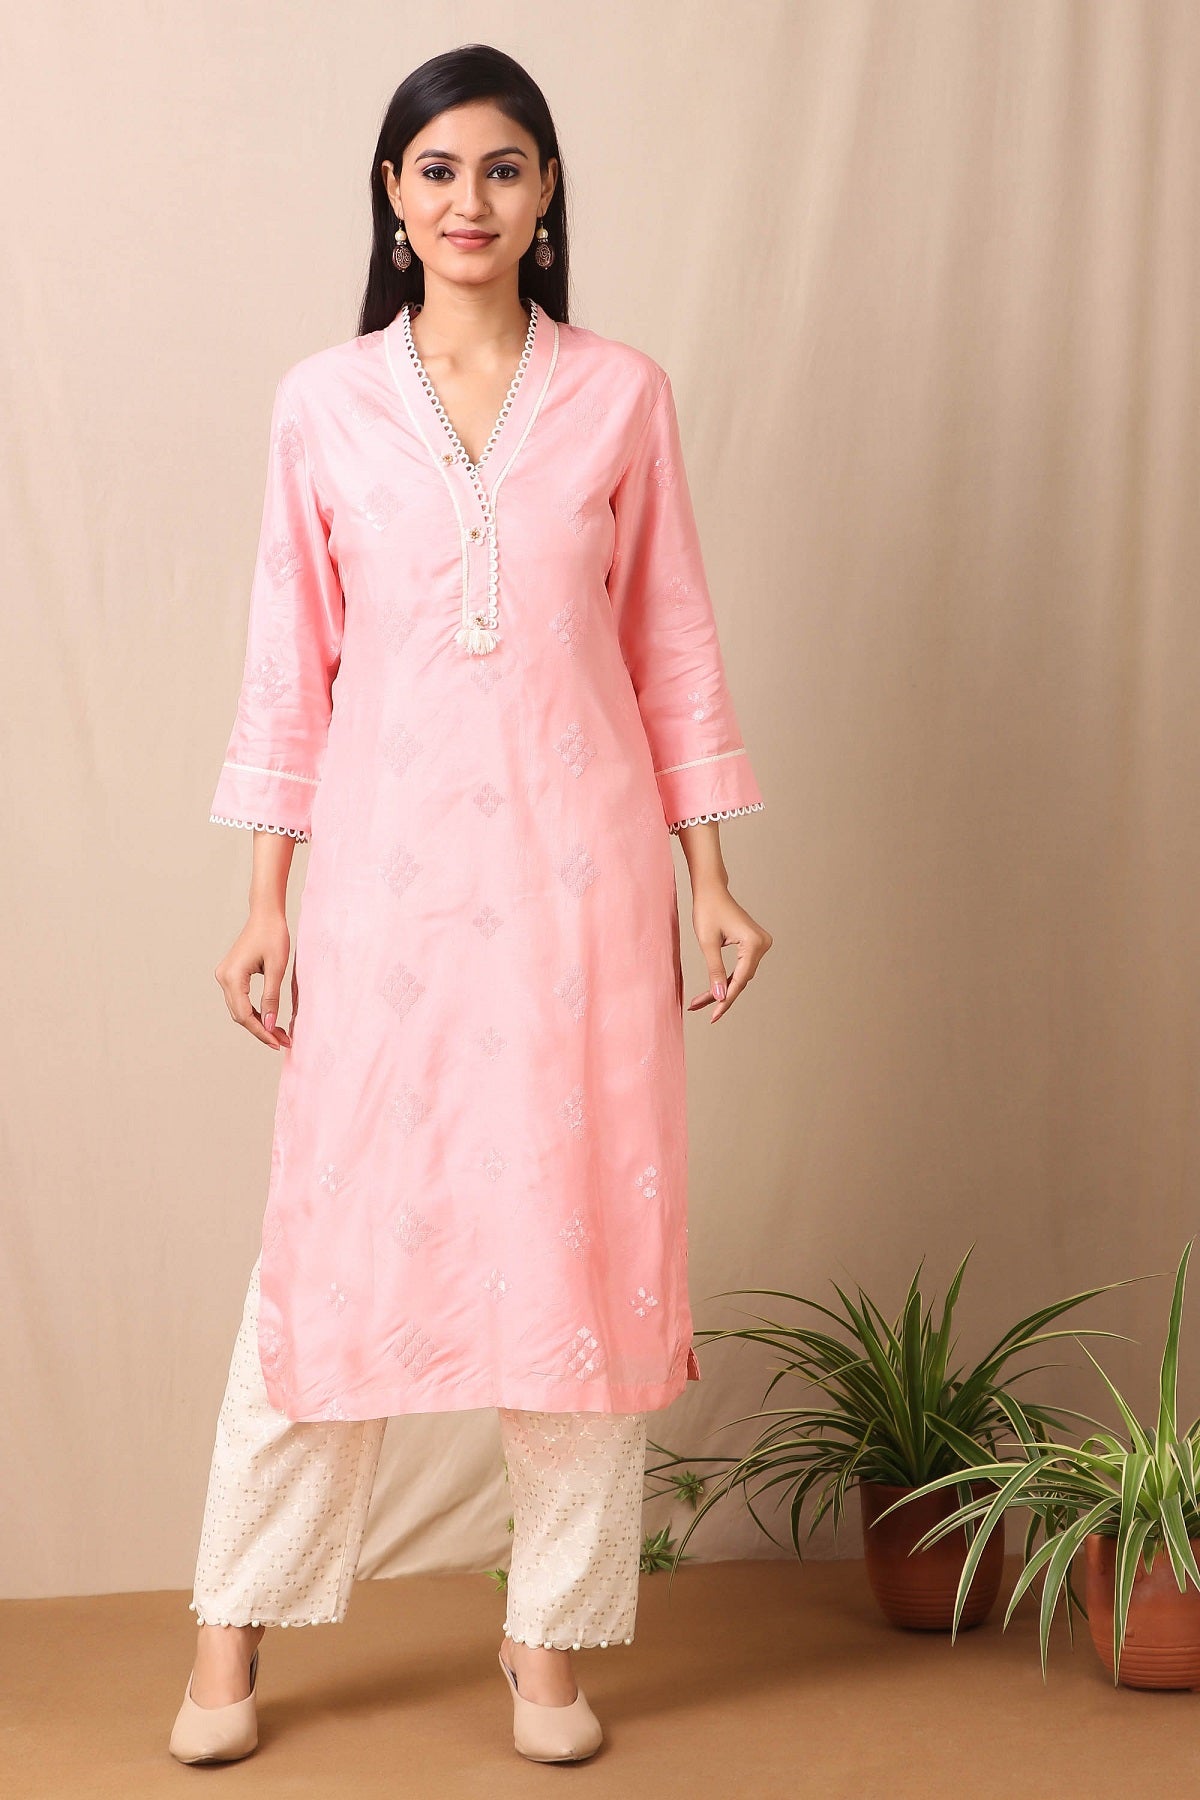 Shop beautiful set of pink upadda silk kurta with tonal sequins motifs and lace around the neckline with beautiful tassels on it and cotton stretch white pant from Pure Elegance. Complete the look by wearing statement jewellery and heels. Light up your ethnic collection of clothing with this kurta cotton white pant set from Pure elegance.  Pair it up with statement jewellery to complete your look from Pure Elegance Indian clothing store in USA online now.-Full view.